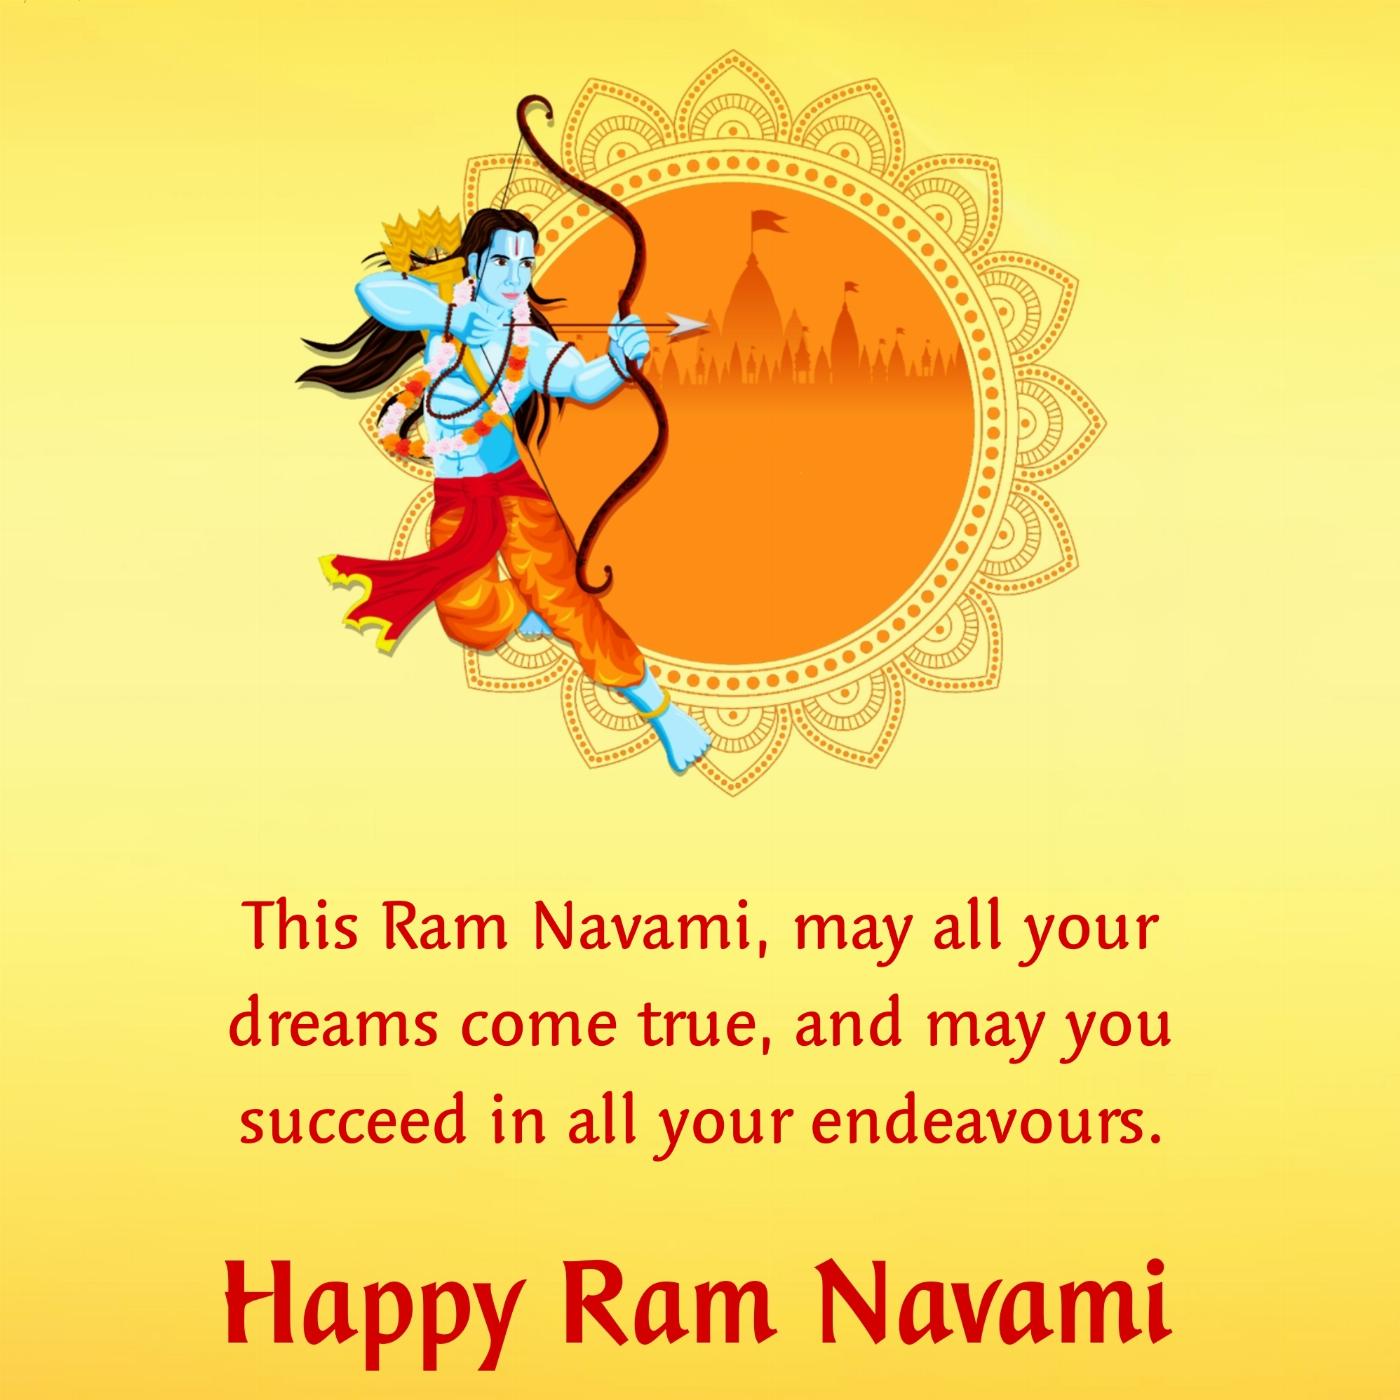 This Ram Navami may all your dreams come true